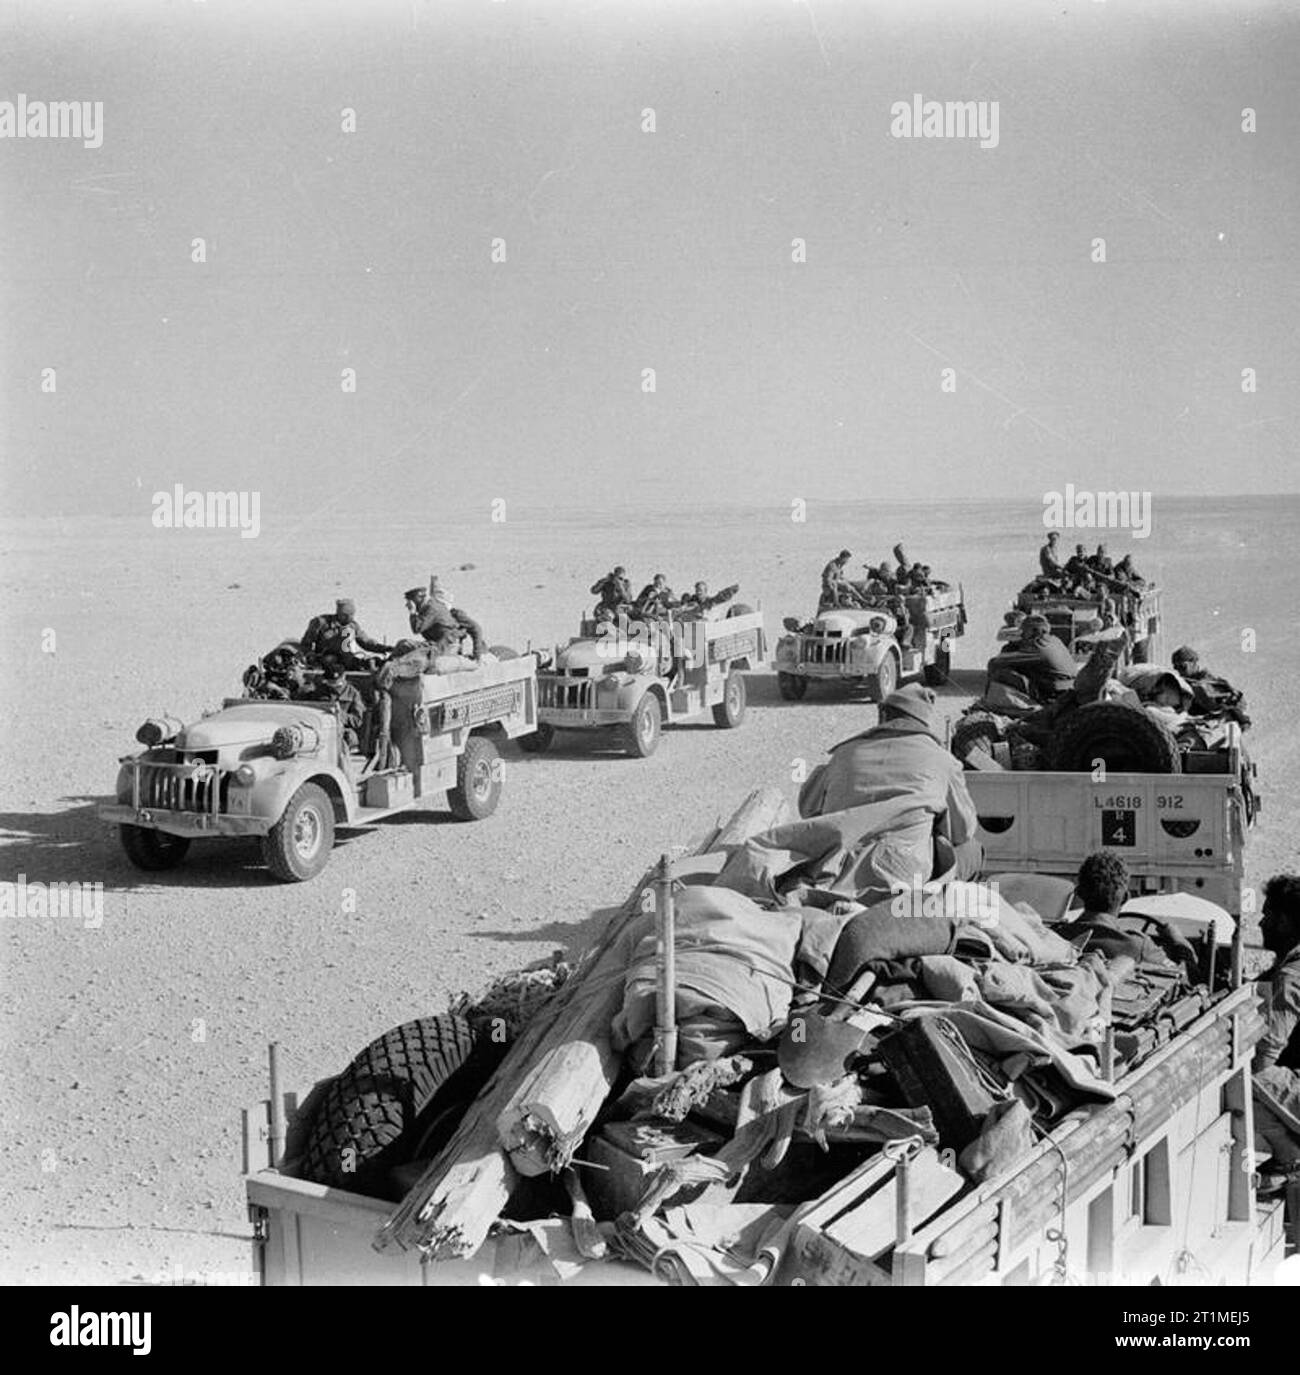 The Campaign in North Africa 1940 - 1943 Two Long Range Desert Group patrols meet in the desert. Stock Photo